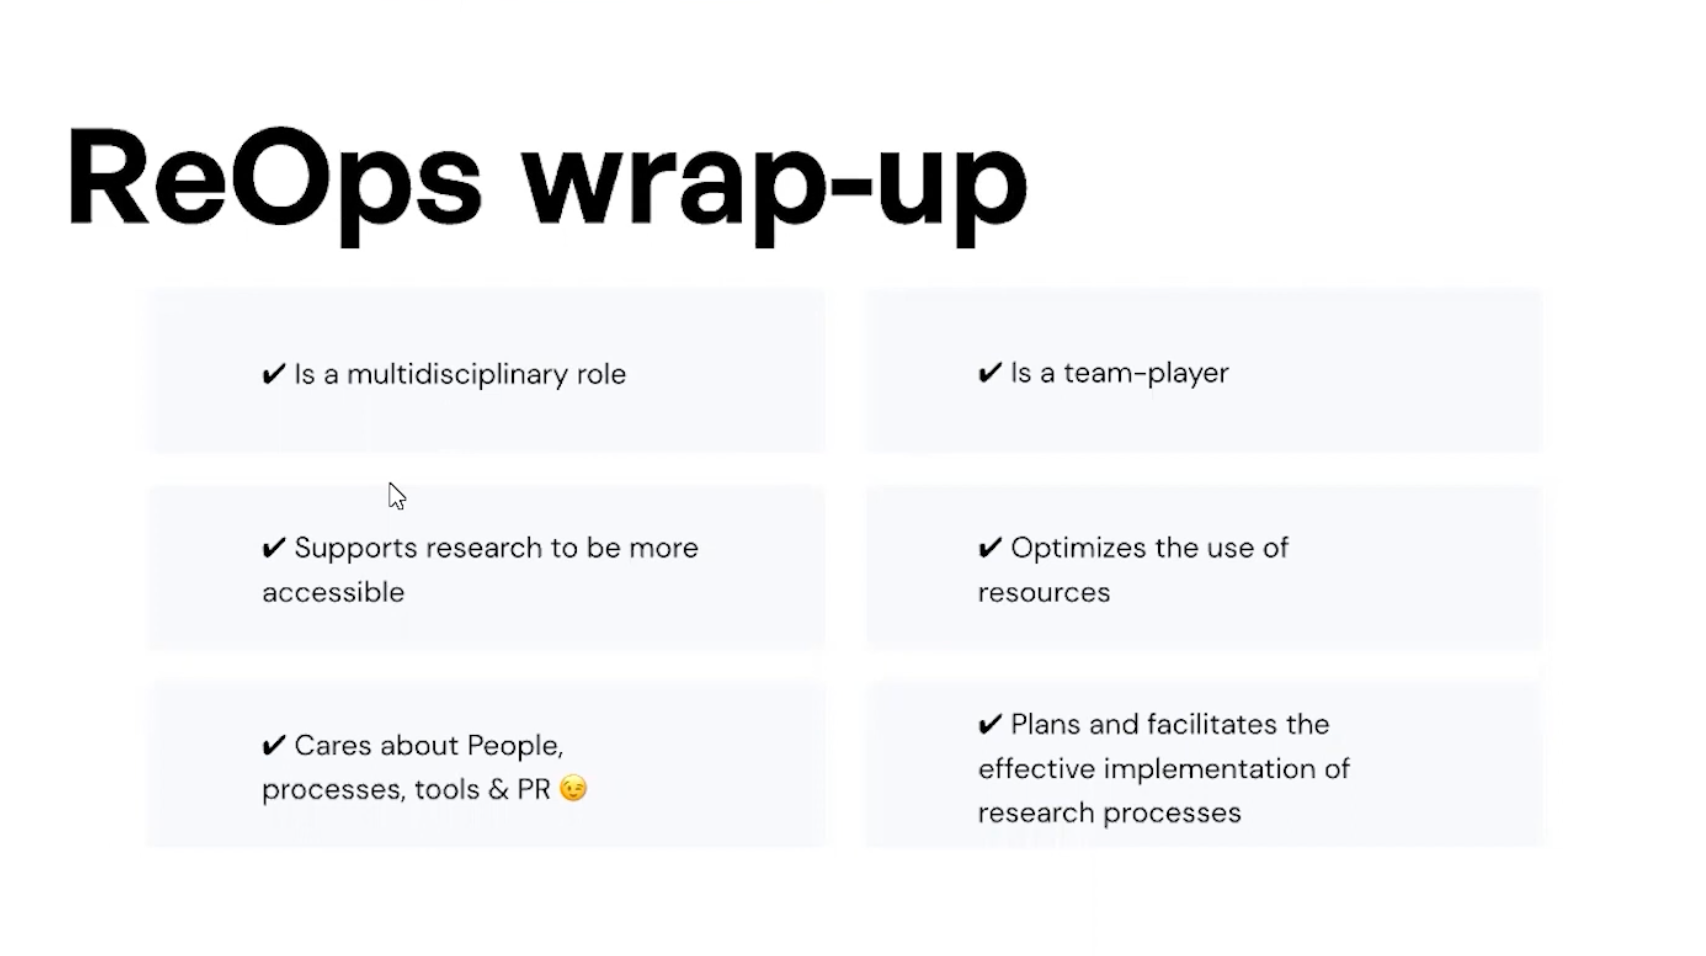 Summary of the ReOps role